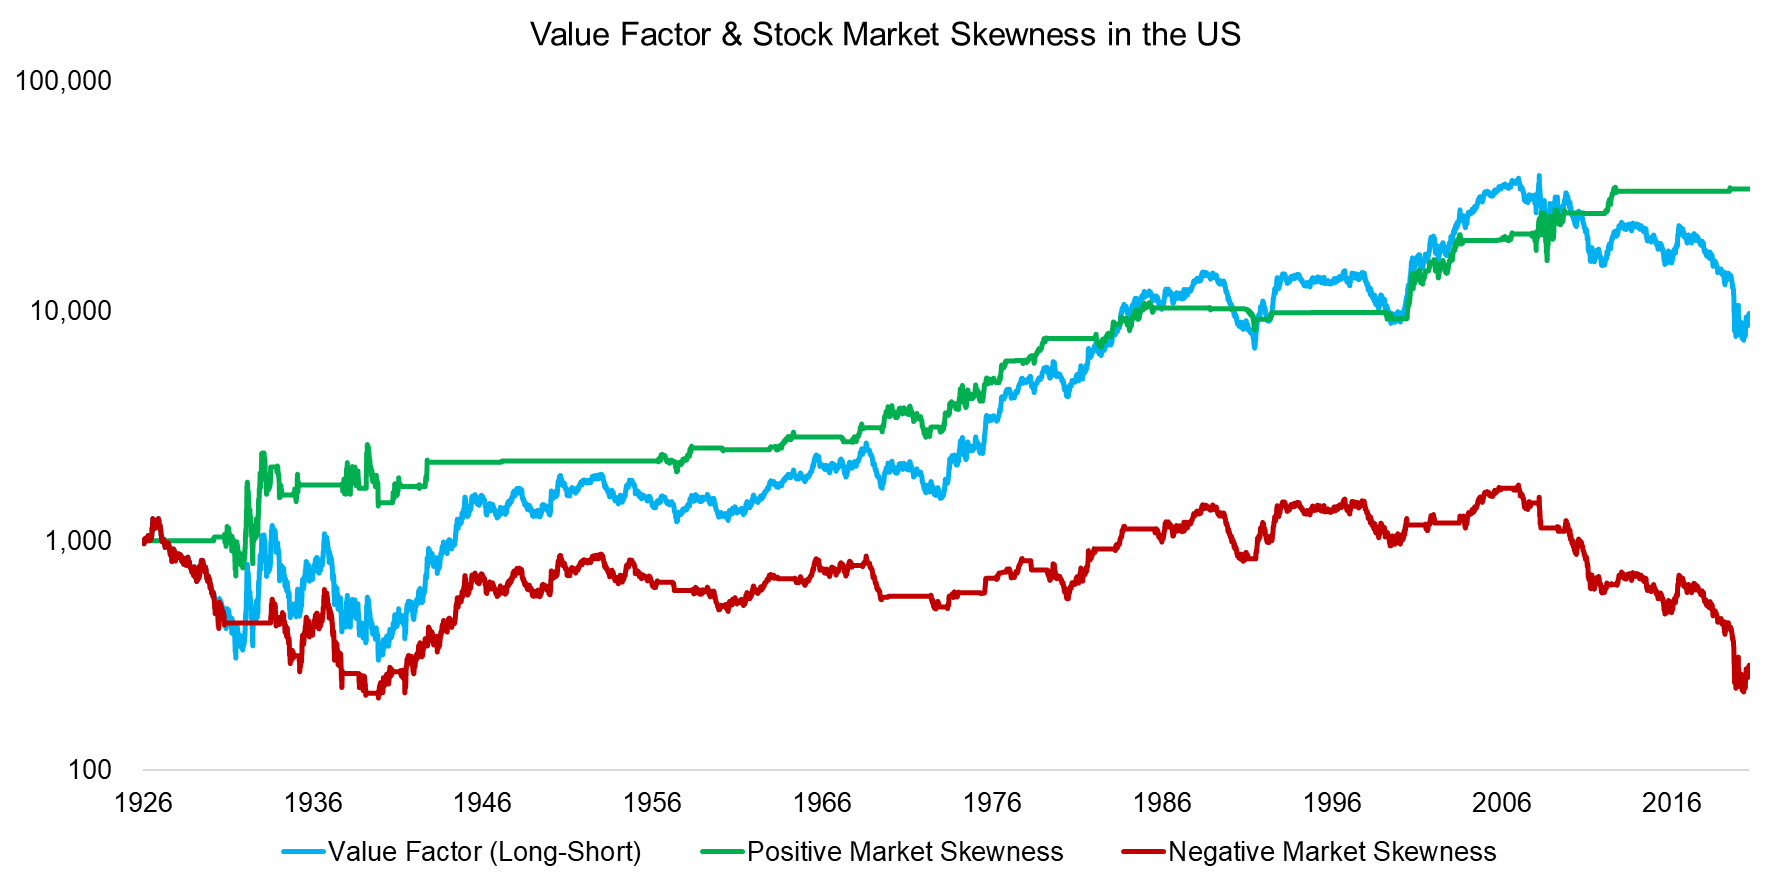 Value Factor & Stock Market Skewness in the US